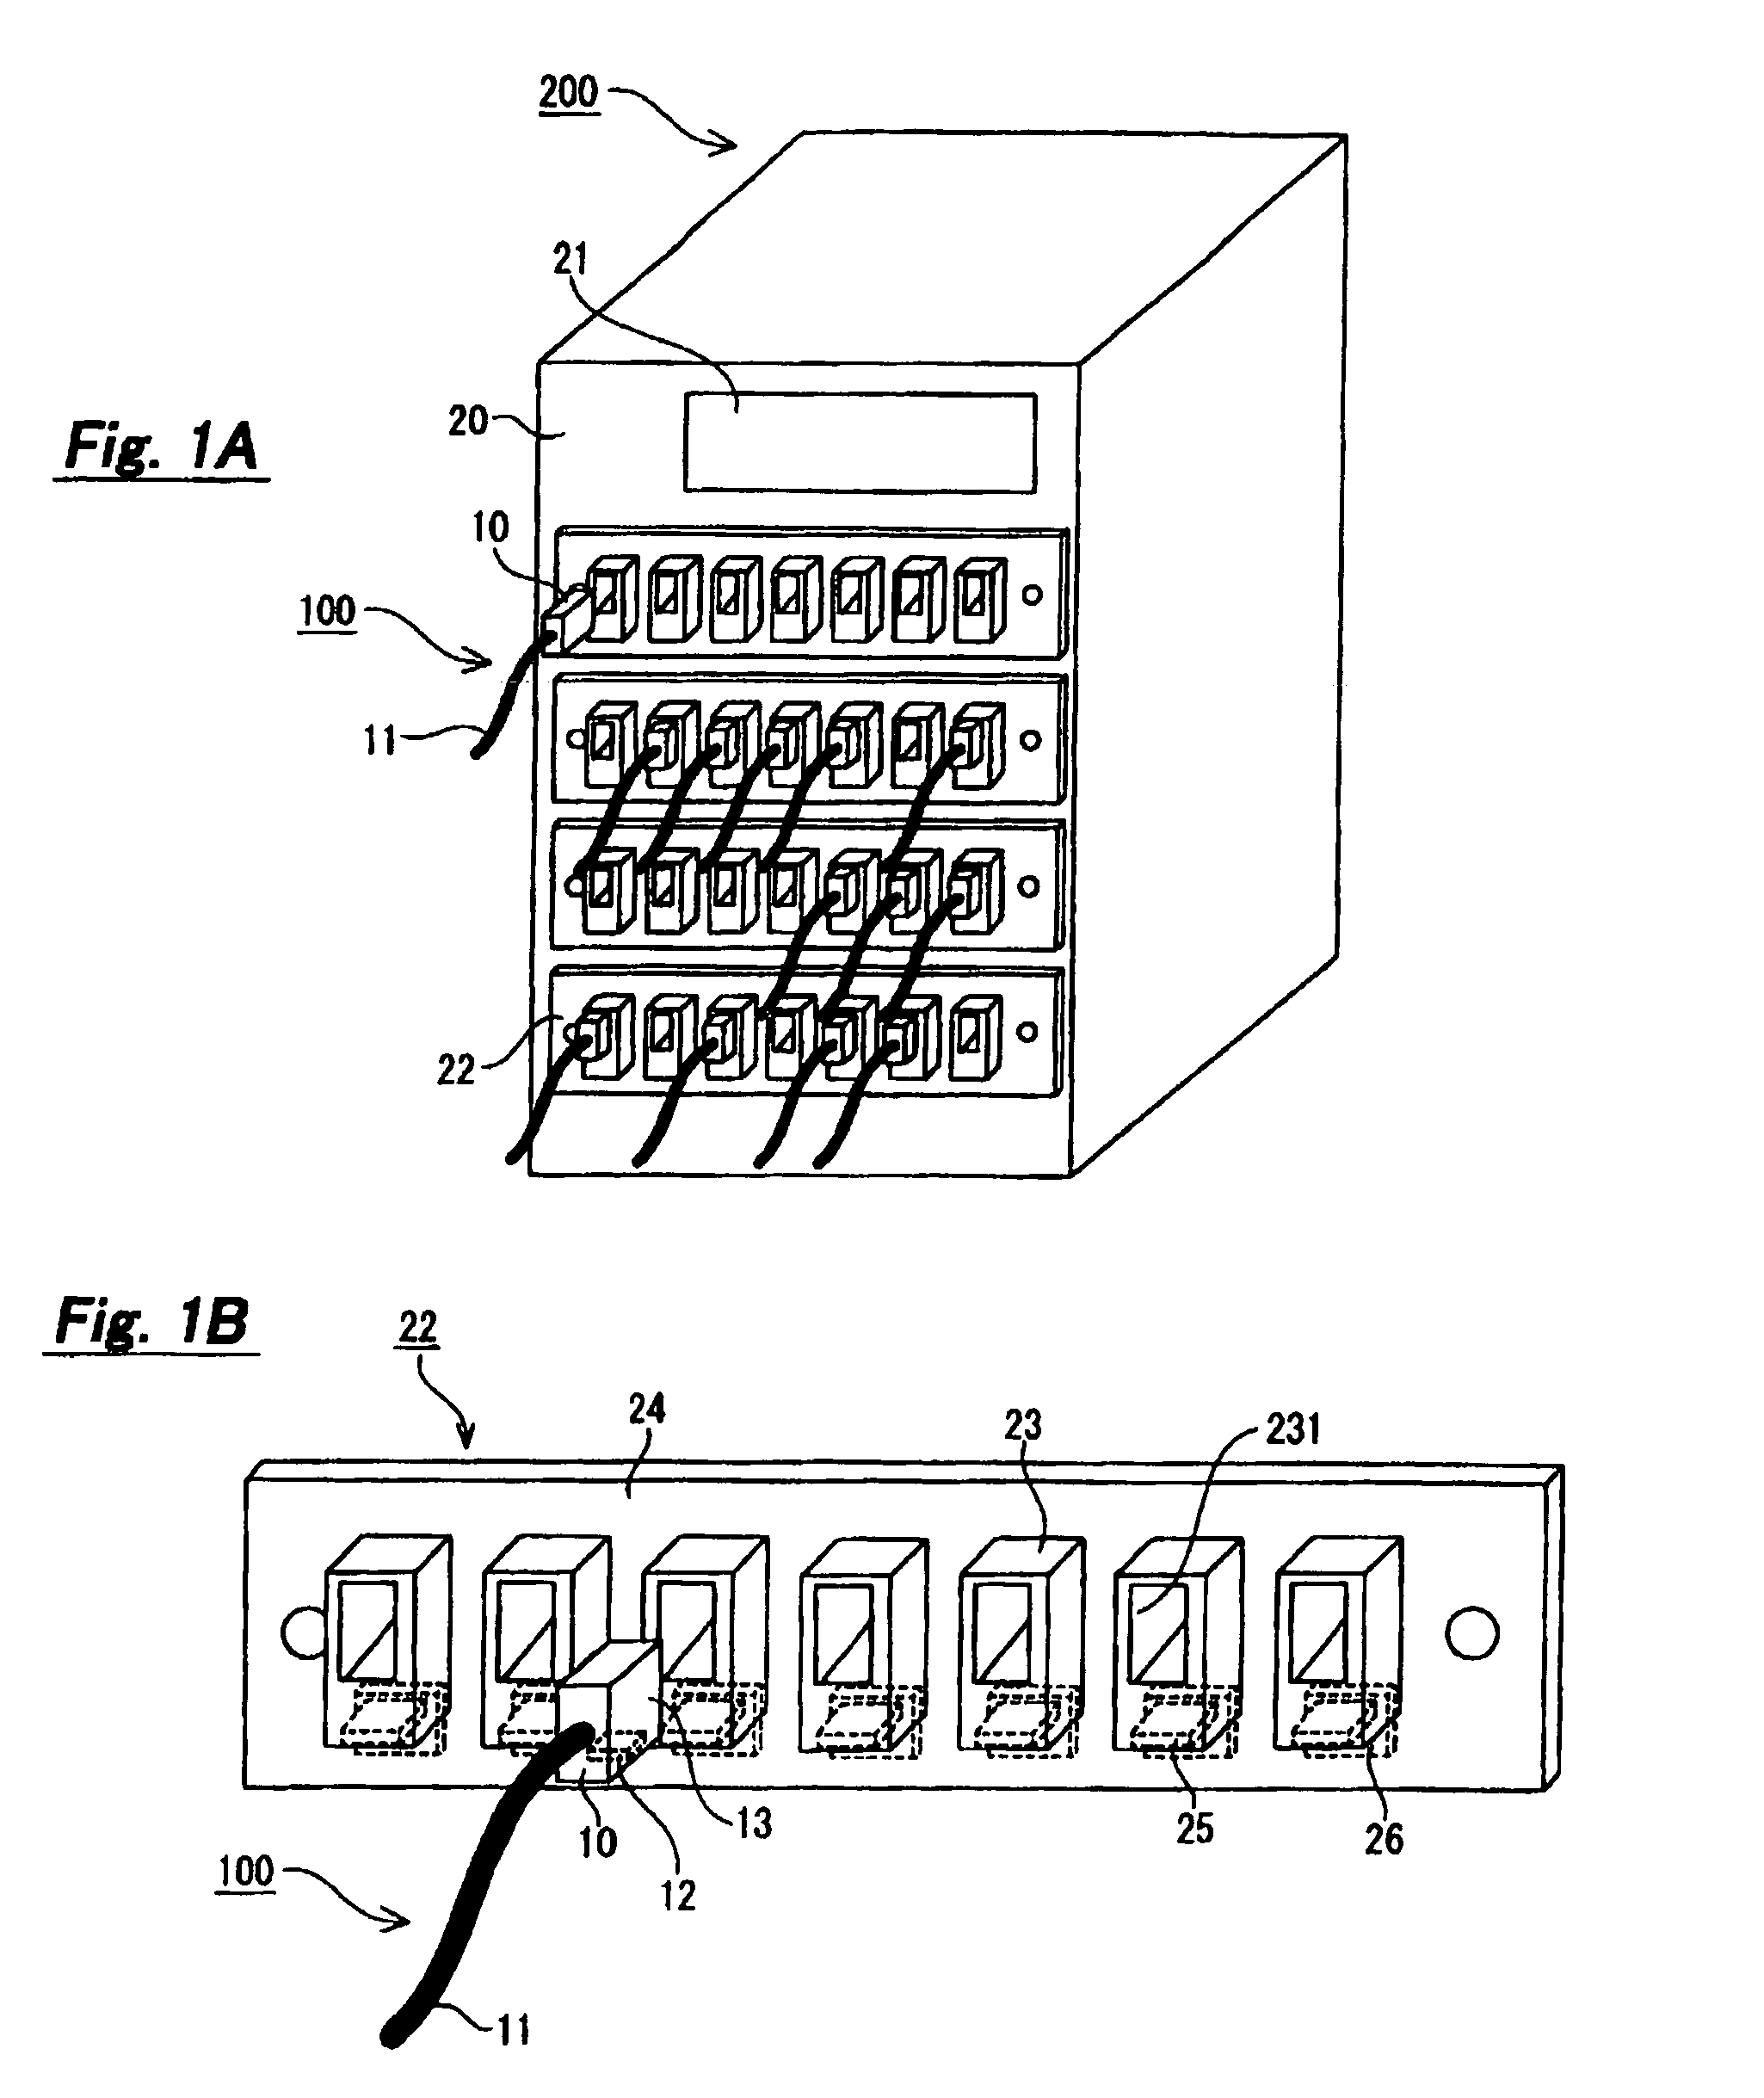 Adapter panel, electronic equipment, and cable connector identification system